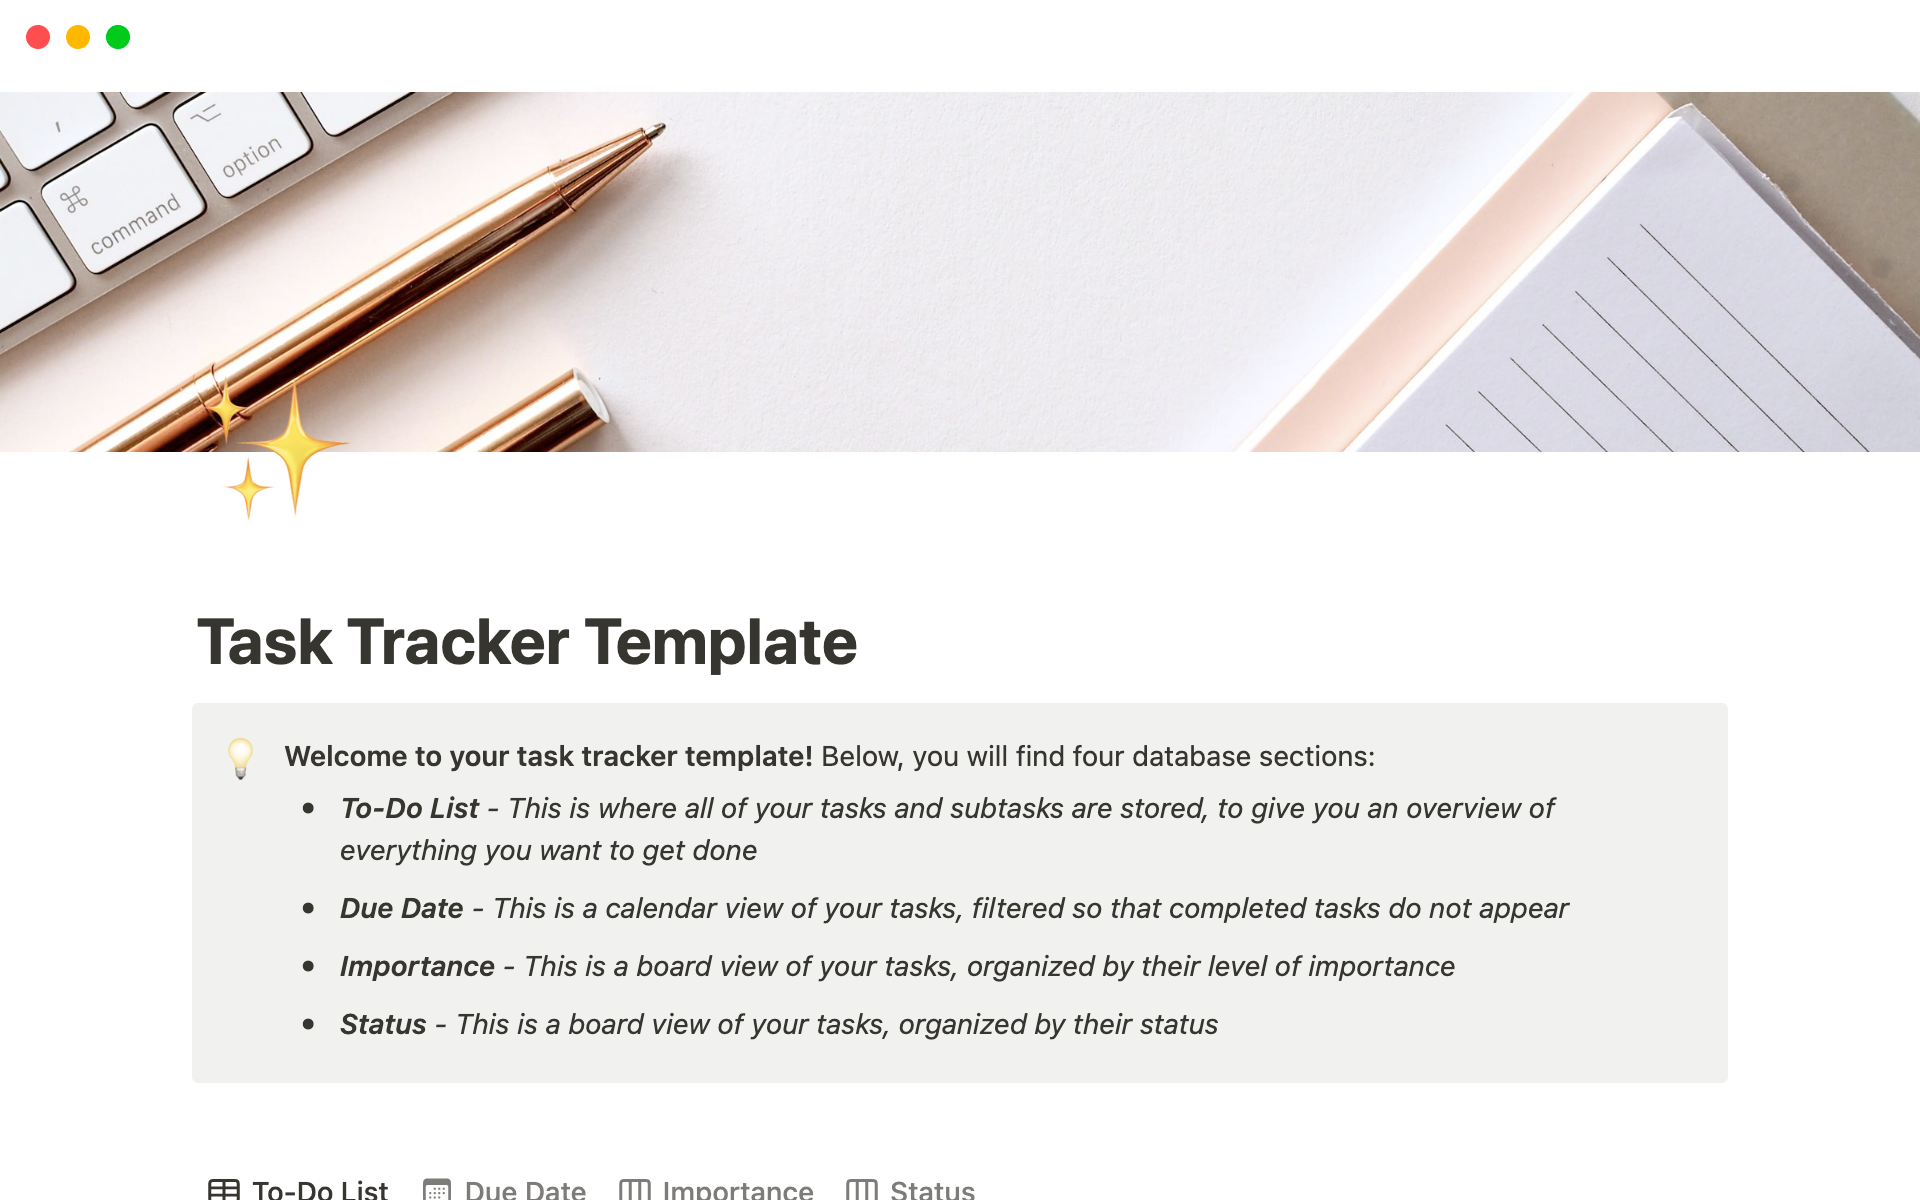 This template helps you keep track of your to-do list by ordering each task by importance, category, status, and date, allowing you to clearly see what needs to be done and when.